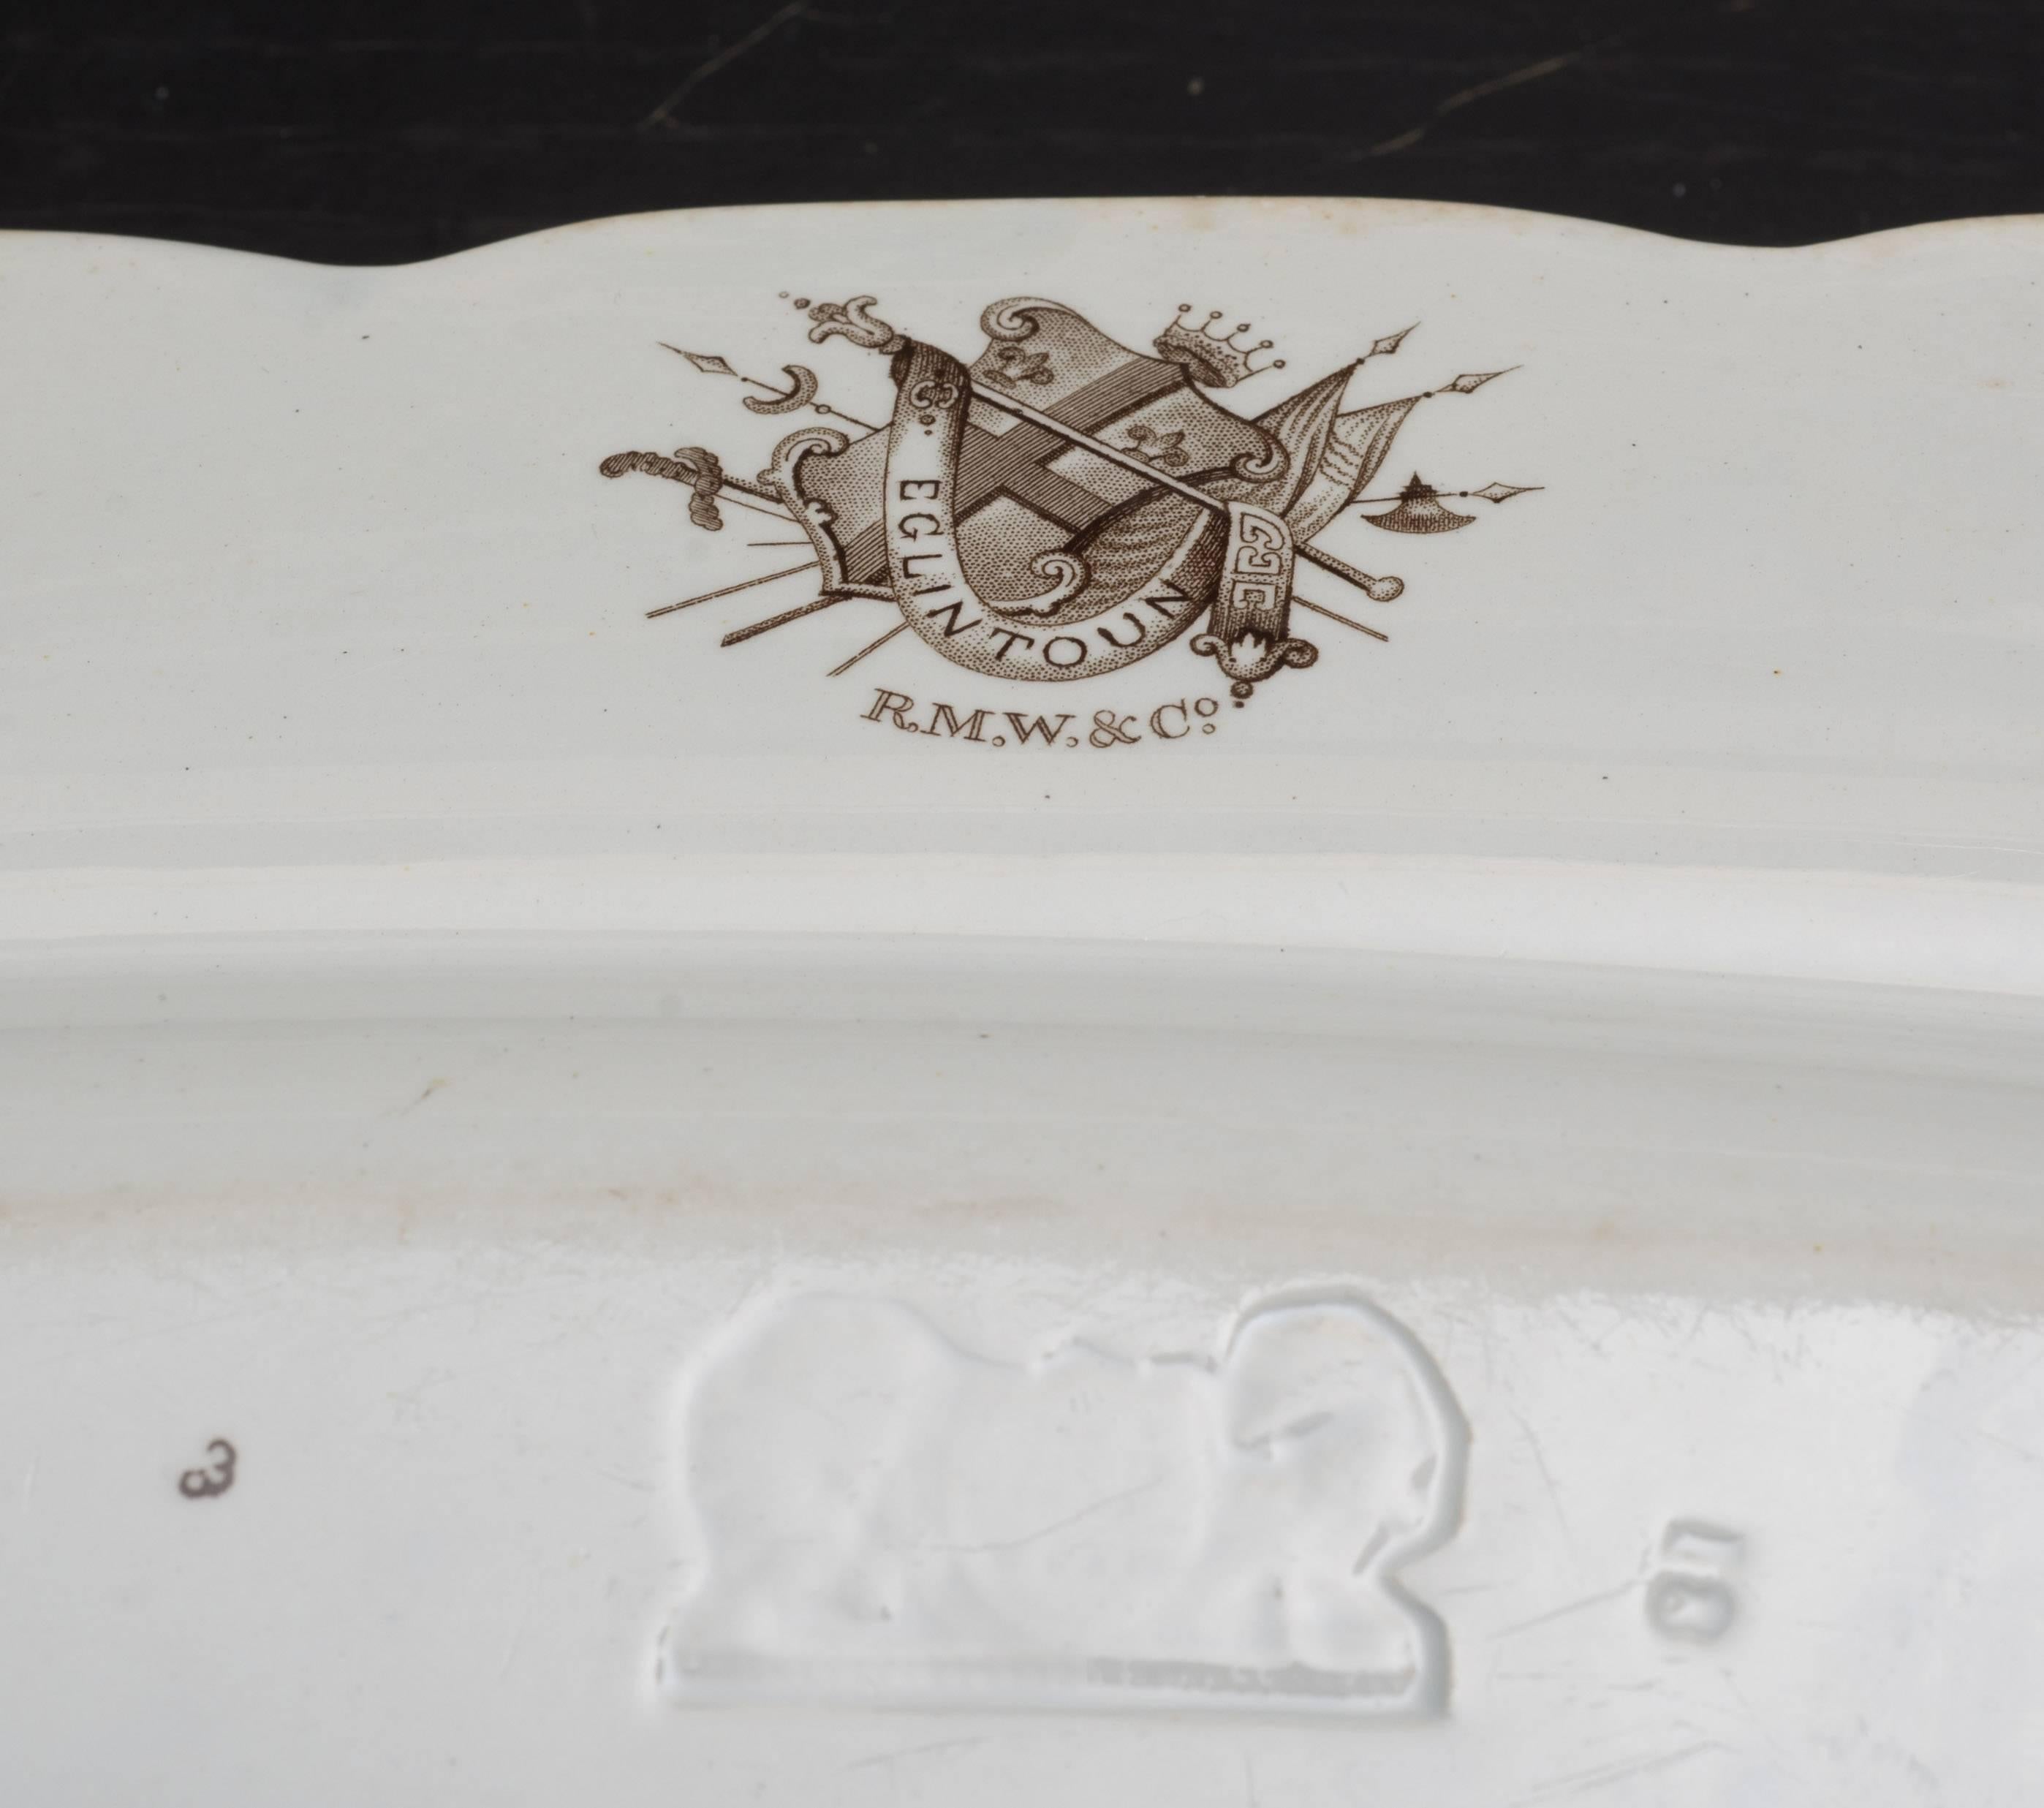 Rare Eglinton tournament ironstone plate by Ridgway, Morley, Wear and Co., Broad Street, Shelton, Hanley, Staffordshire (1836-1842) Transfer printed with a continuous band of fleur-de-lys, circa 1839-1840. Printed with a collection of medieval arms,